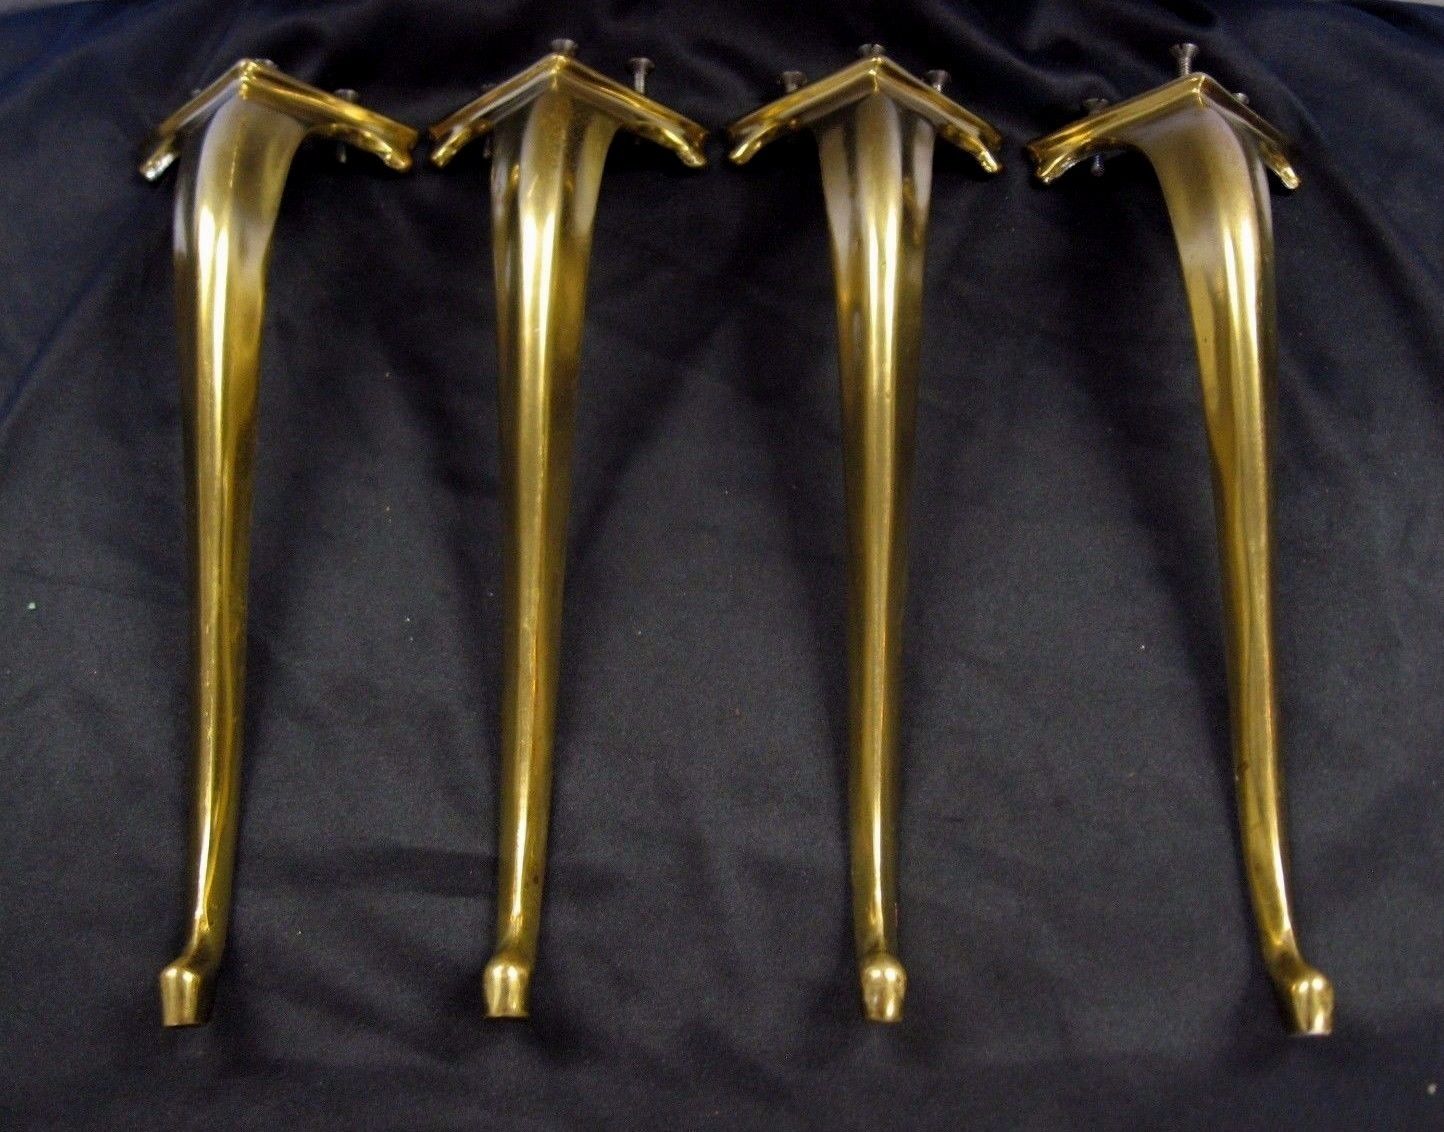 Set of 4 Vintage Mid-Century Solid Brass Cabriolet Table Bench Legs